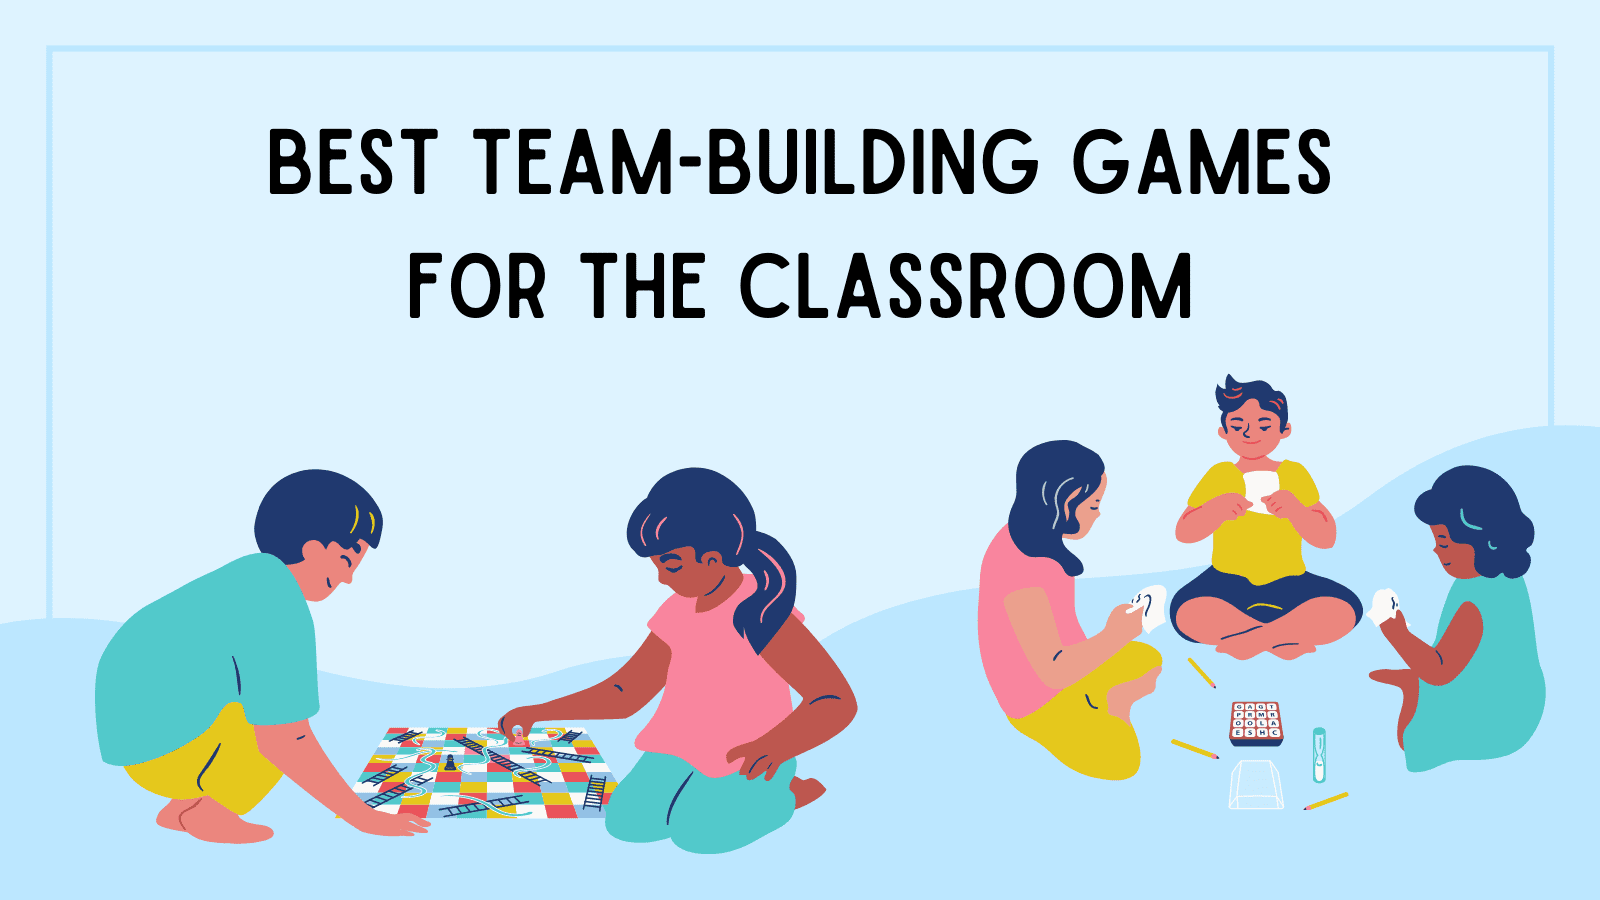 Best team-building games for the classroom.